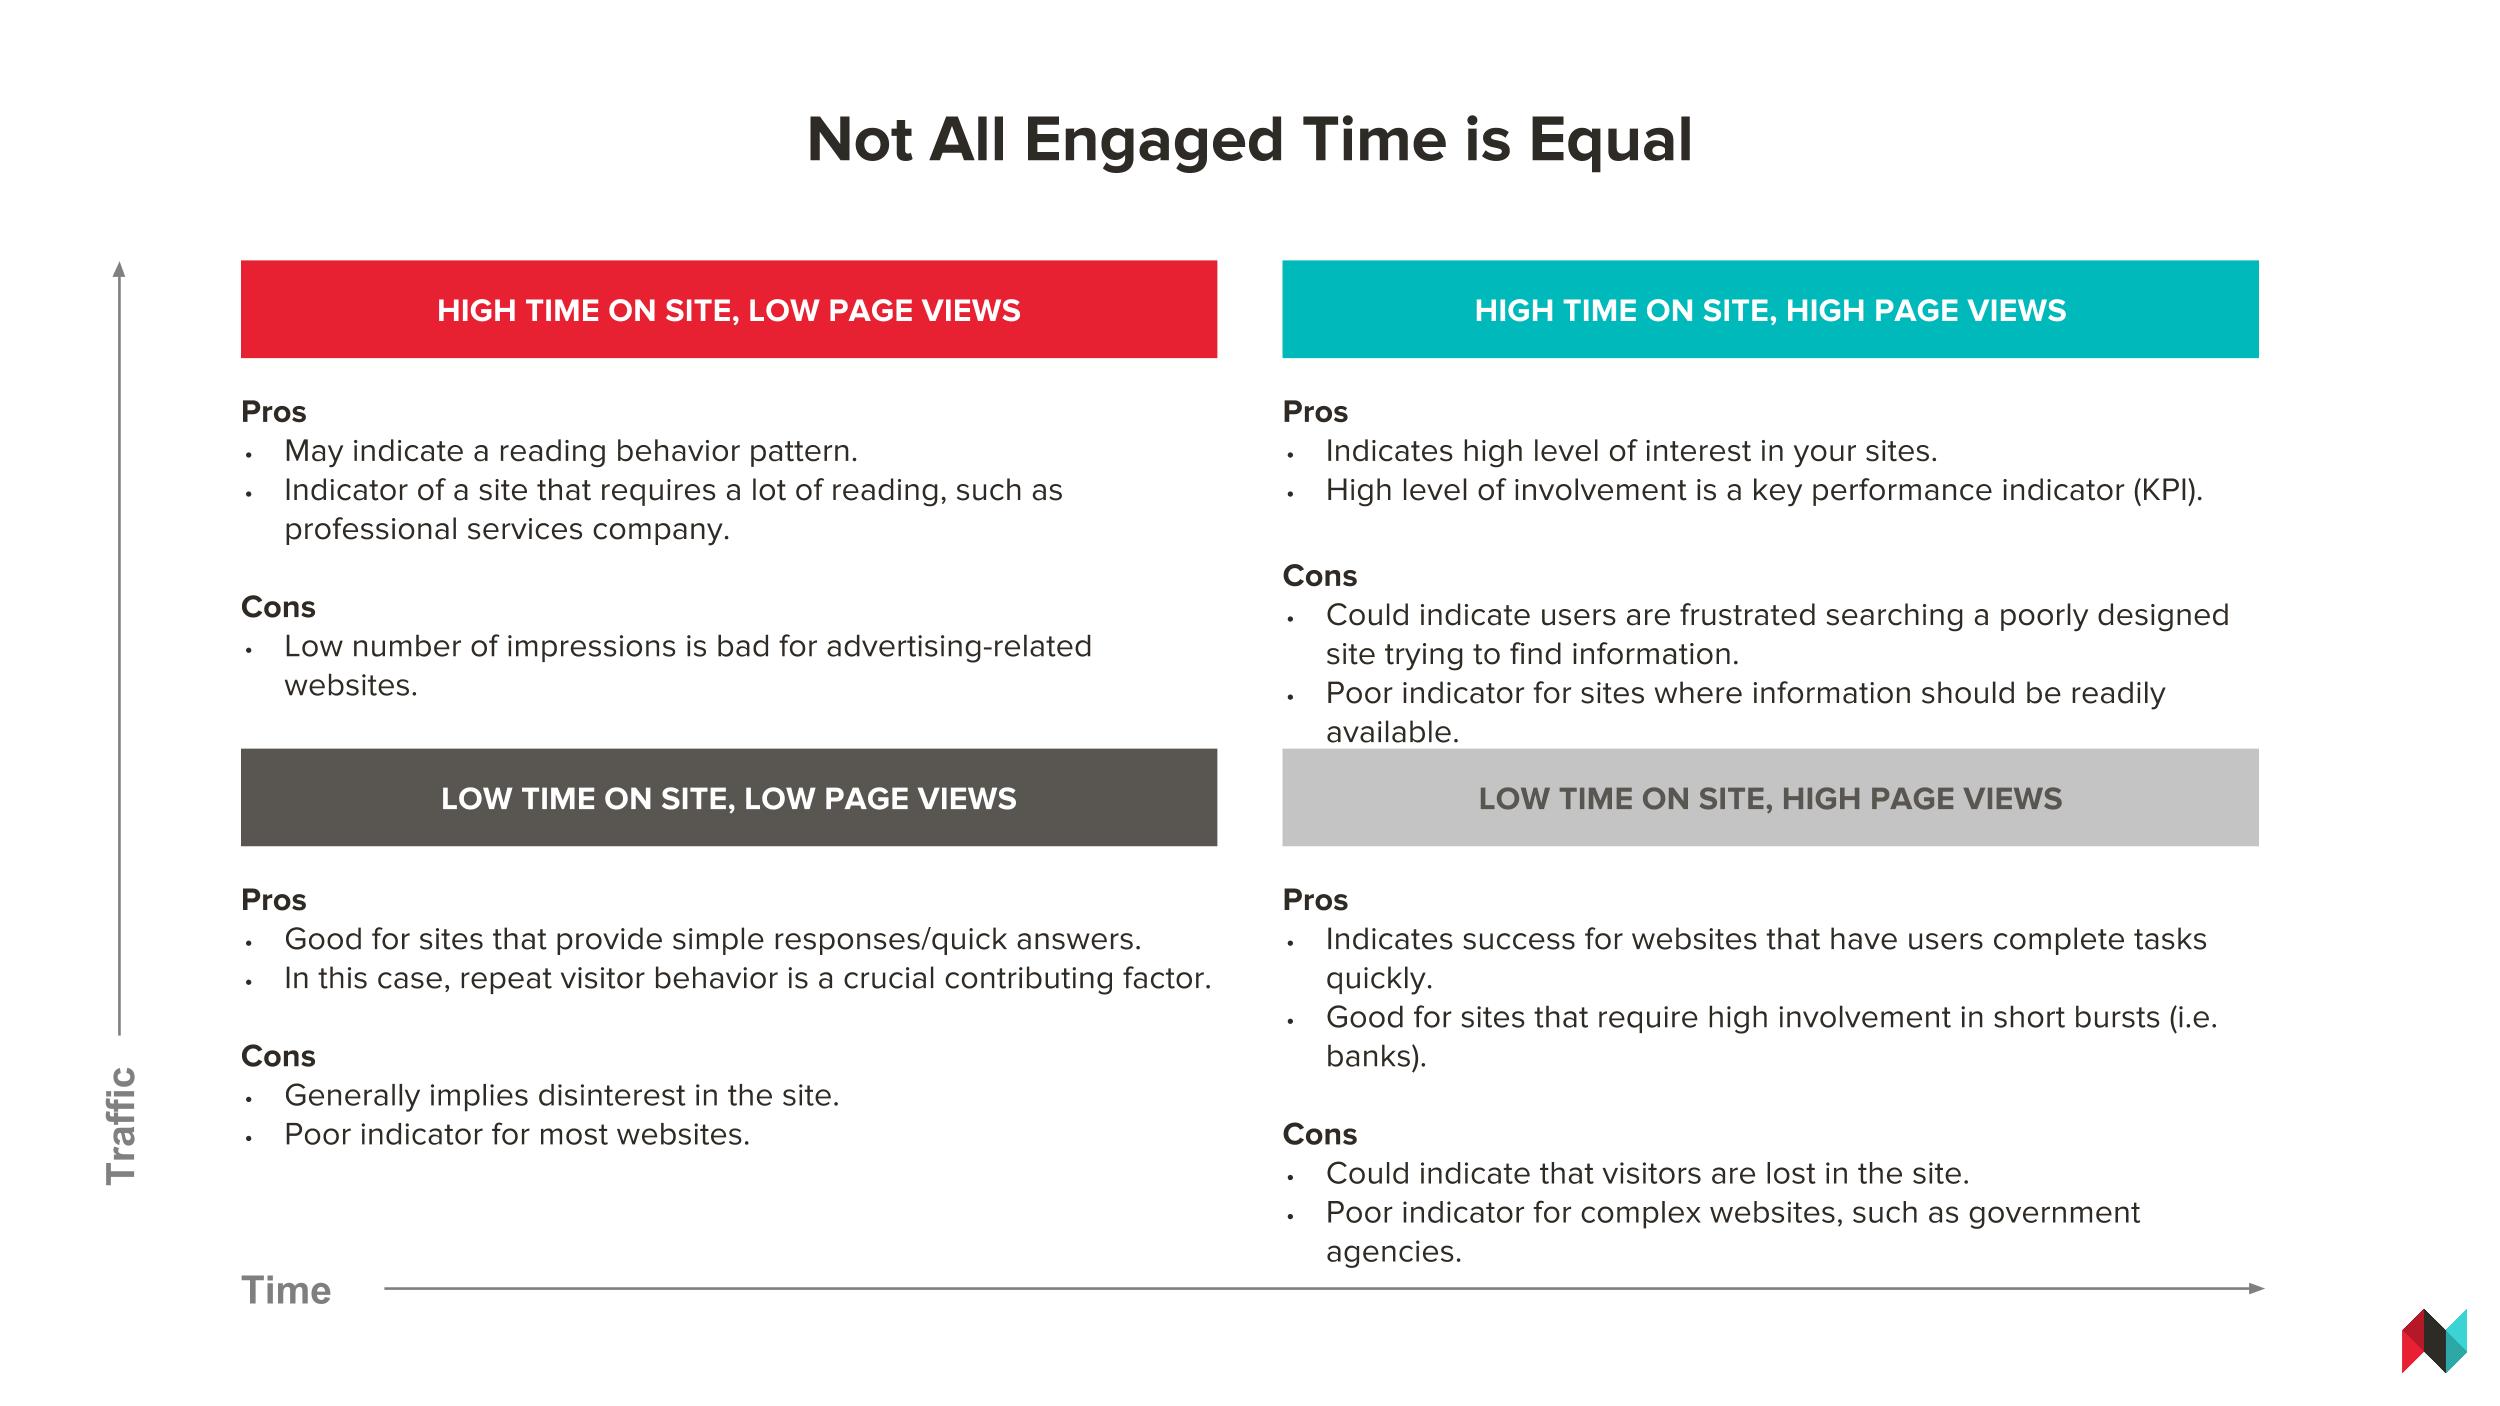 Not all engaged time is equal